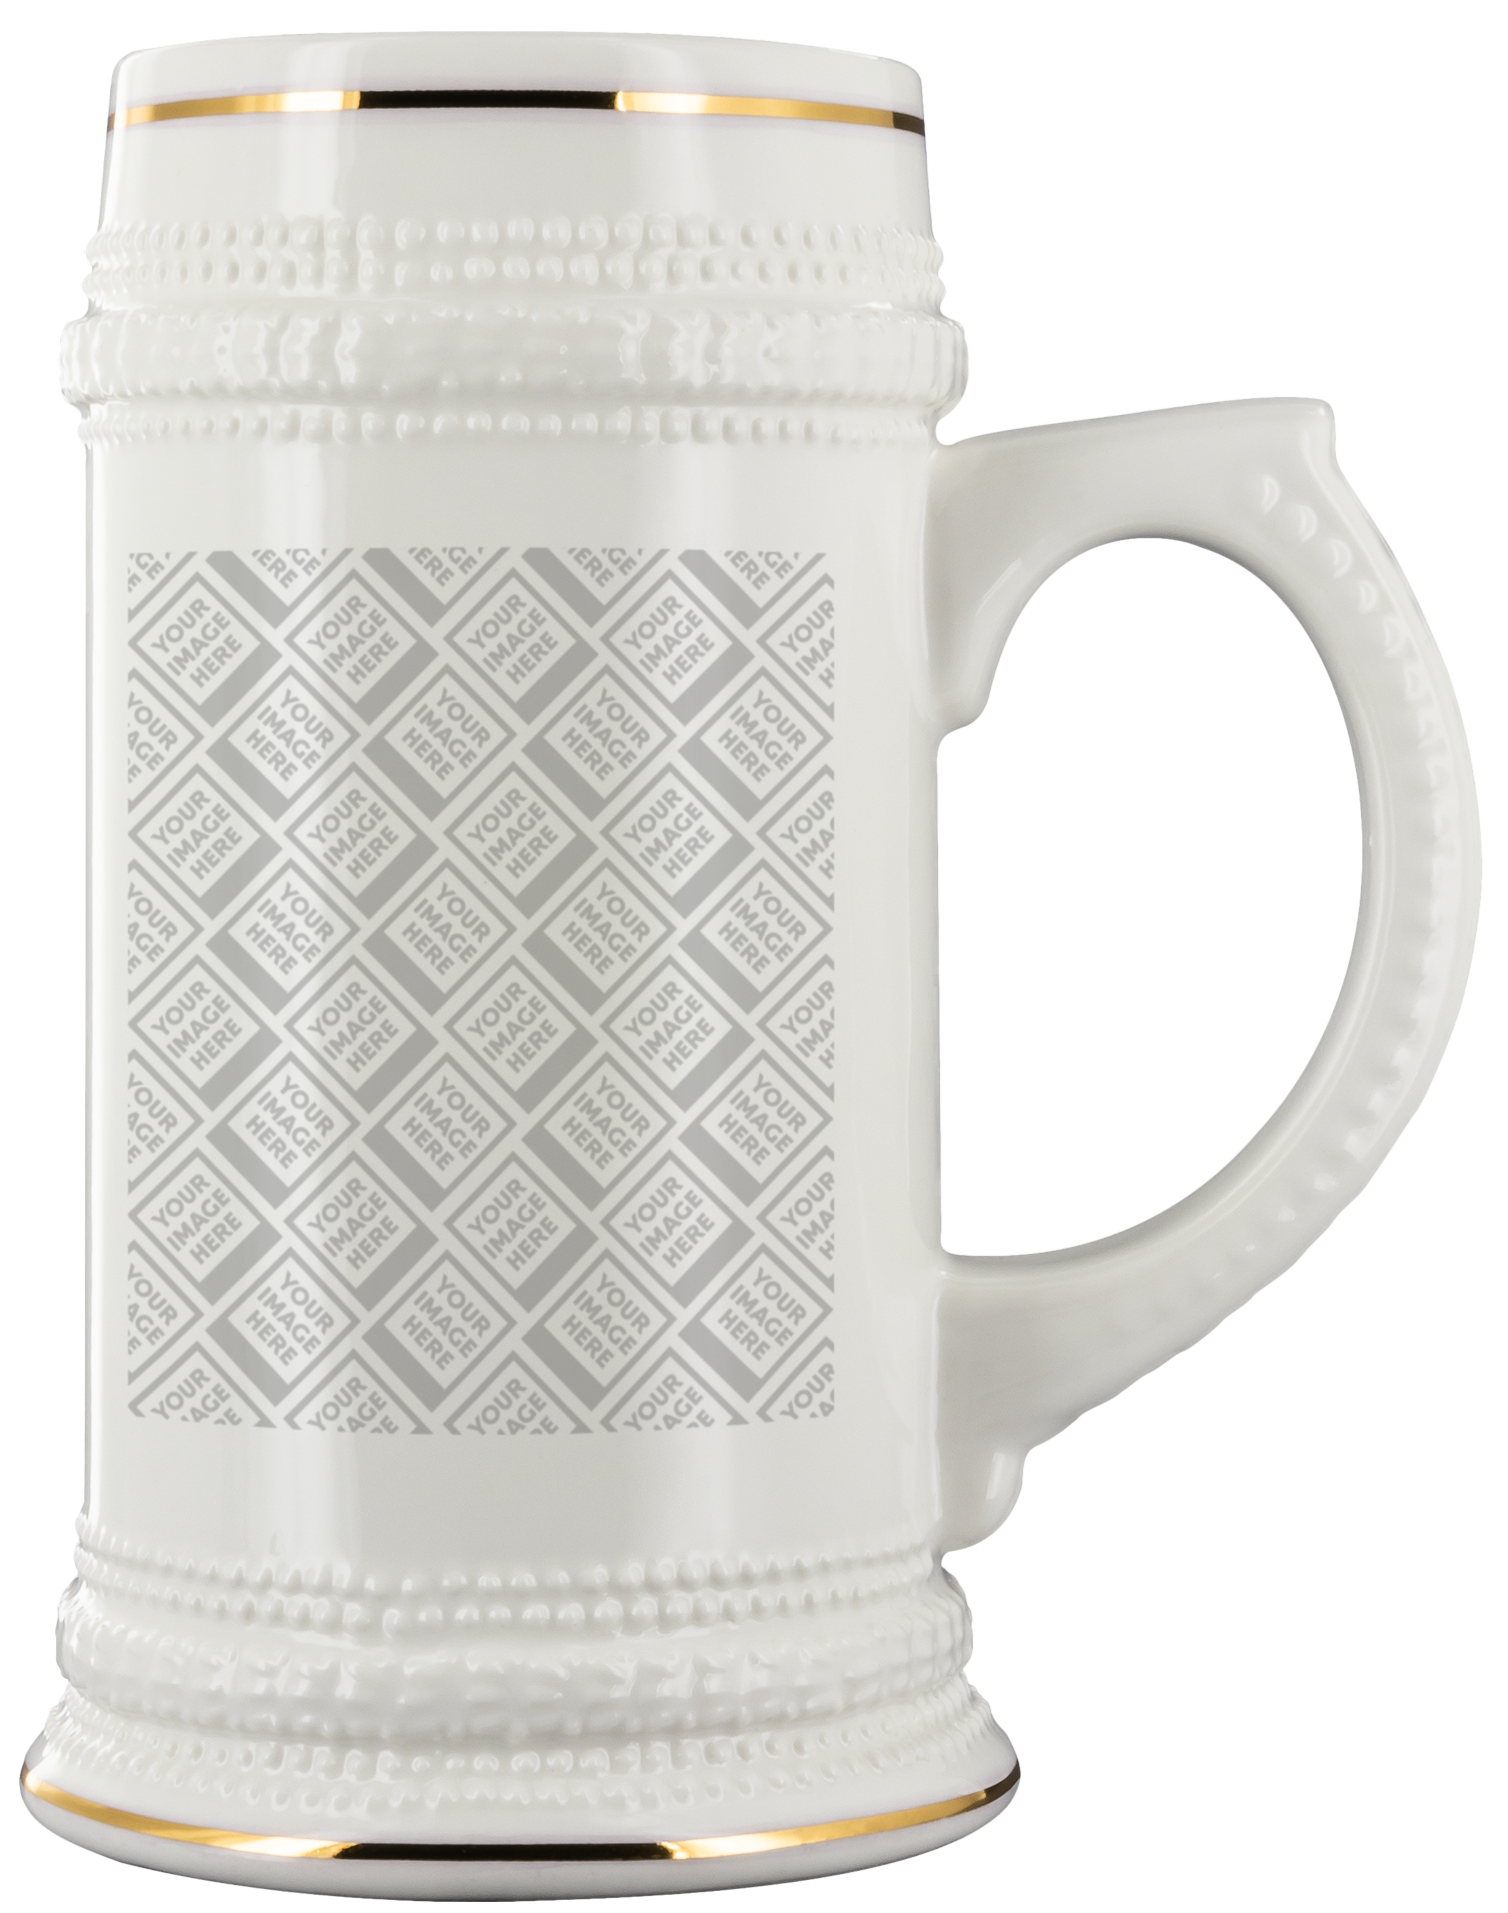 Personalize This Beer Stein